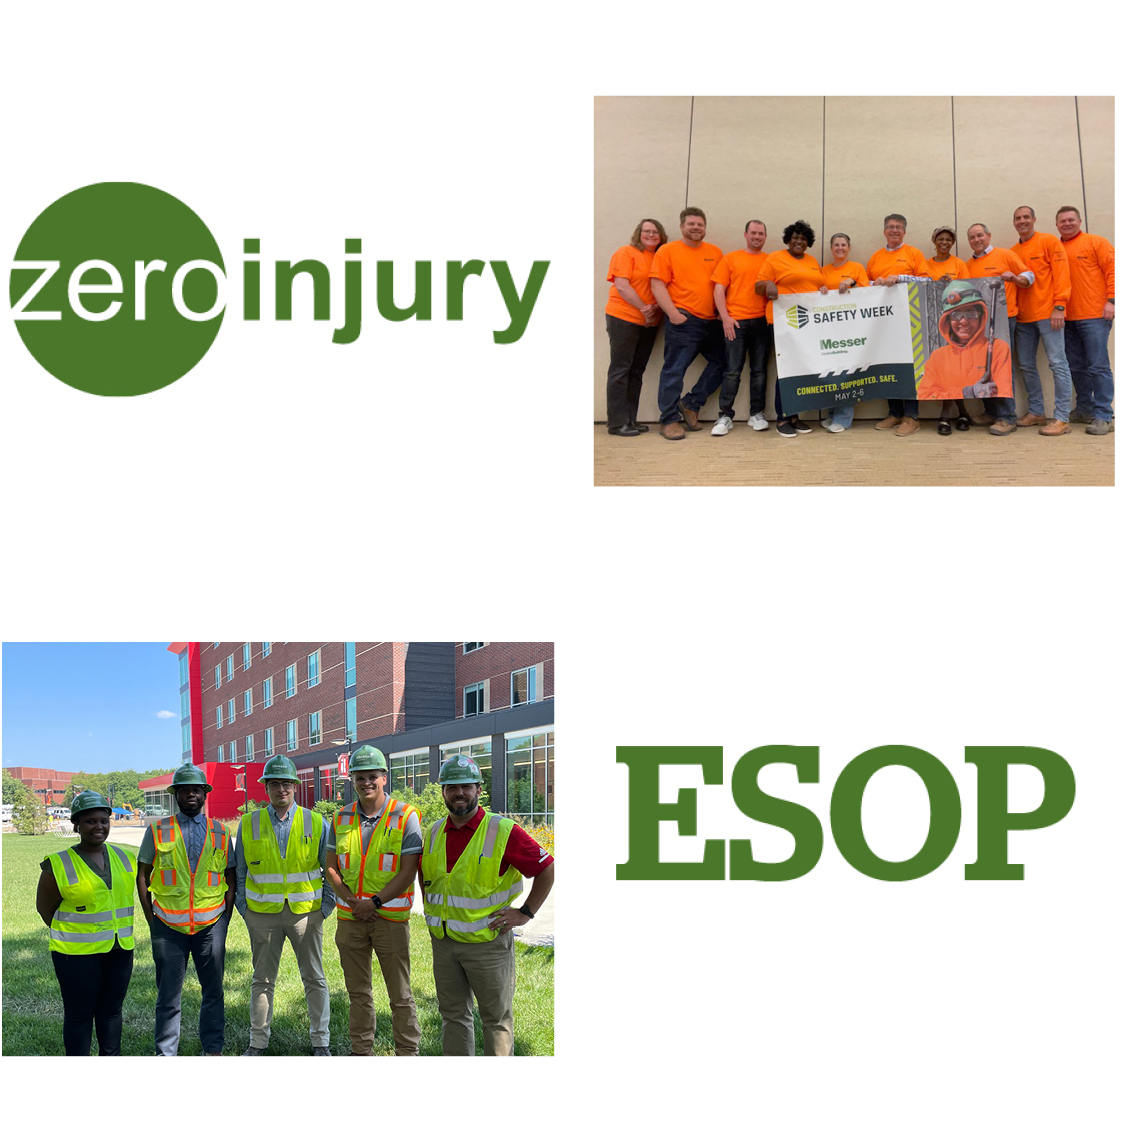 Culture pics zero injury and ESOP icons